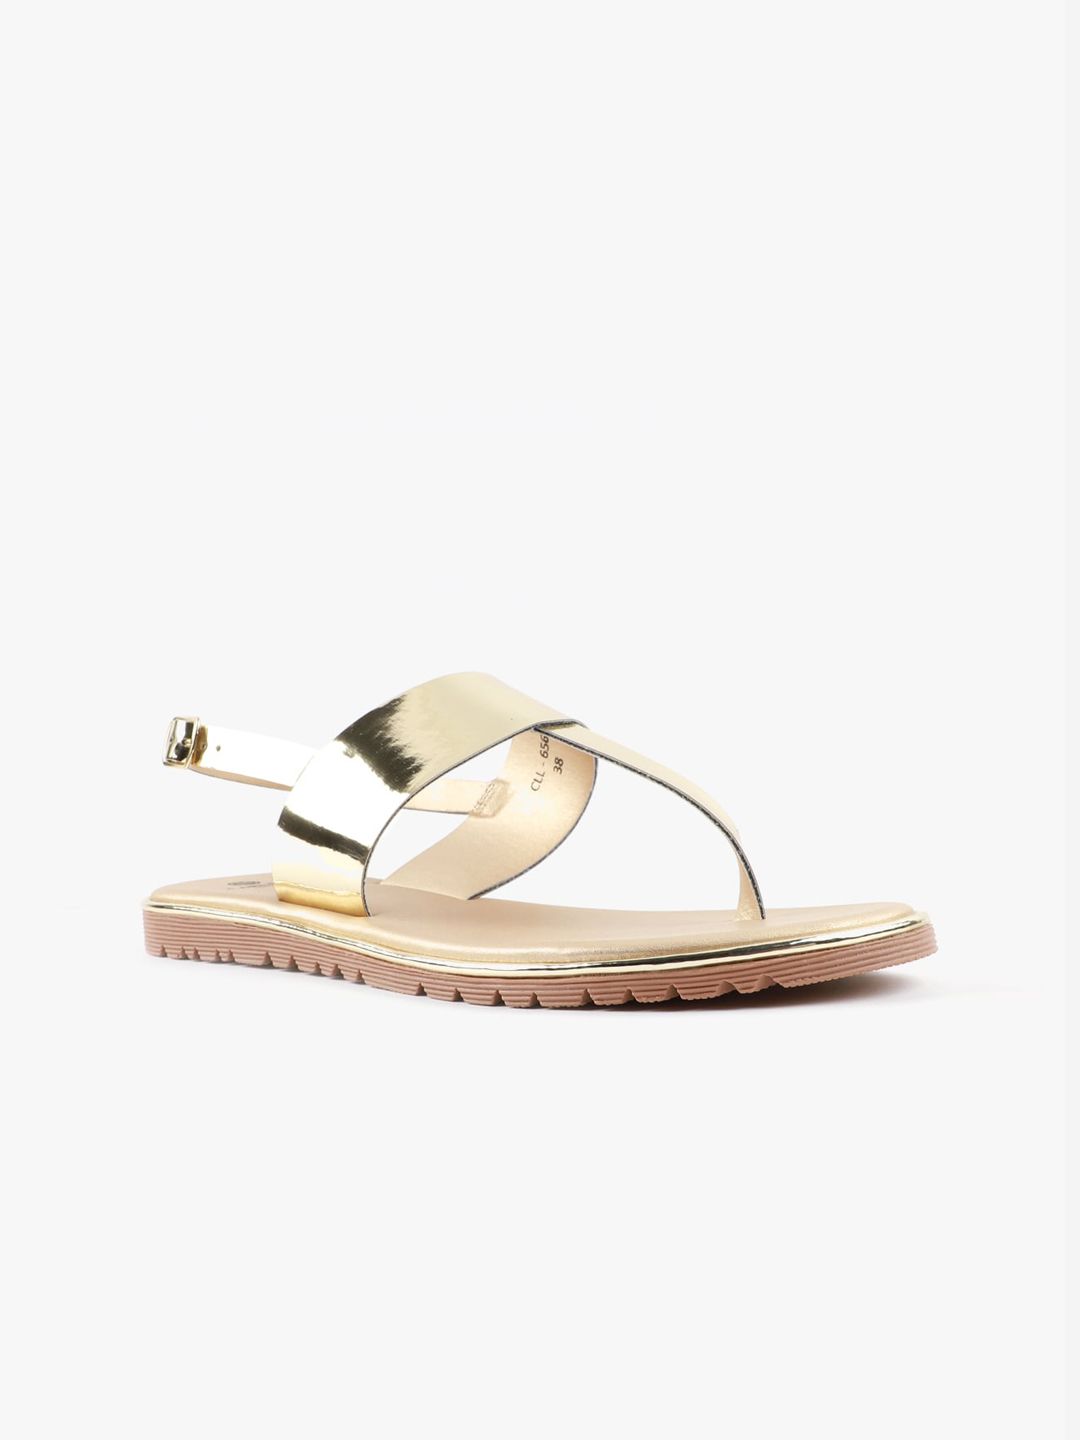 Carlton London Gold-Toned Kitten Sandals with Buckles Price in India